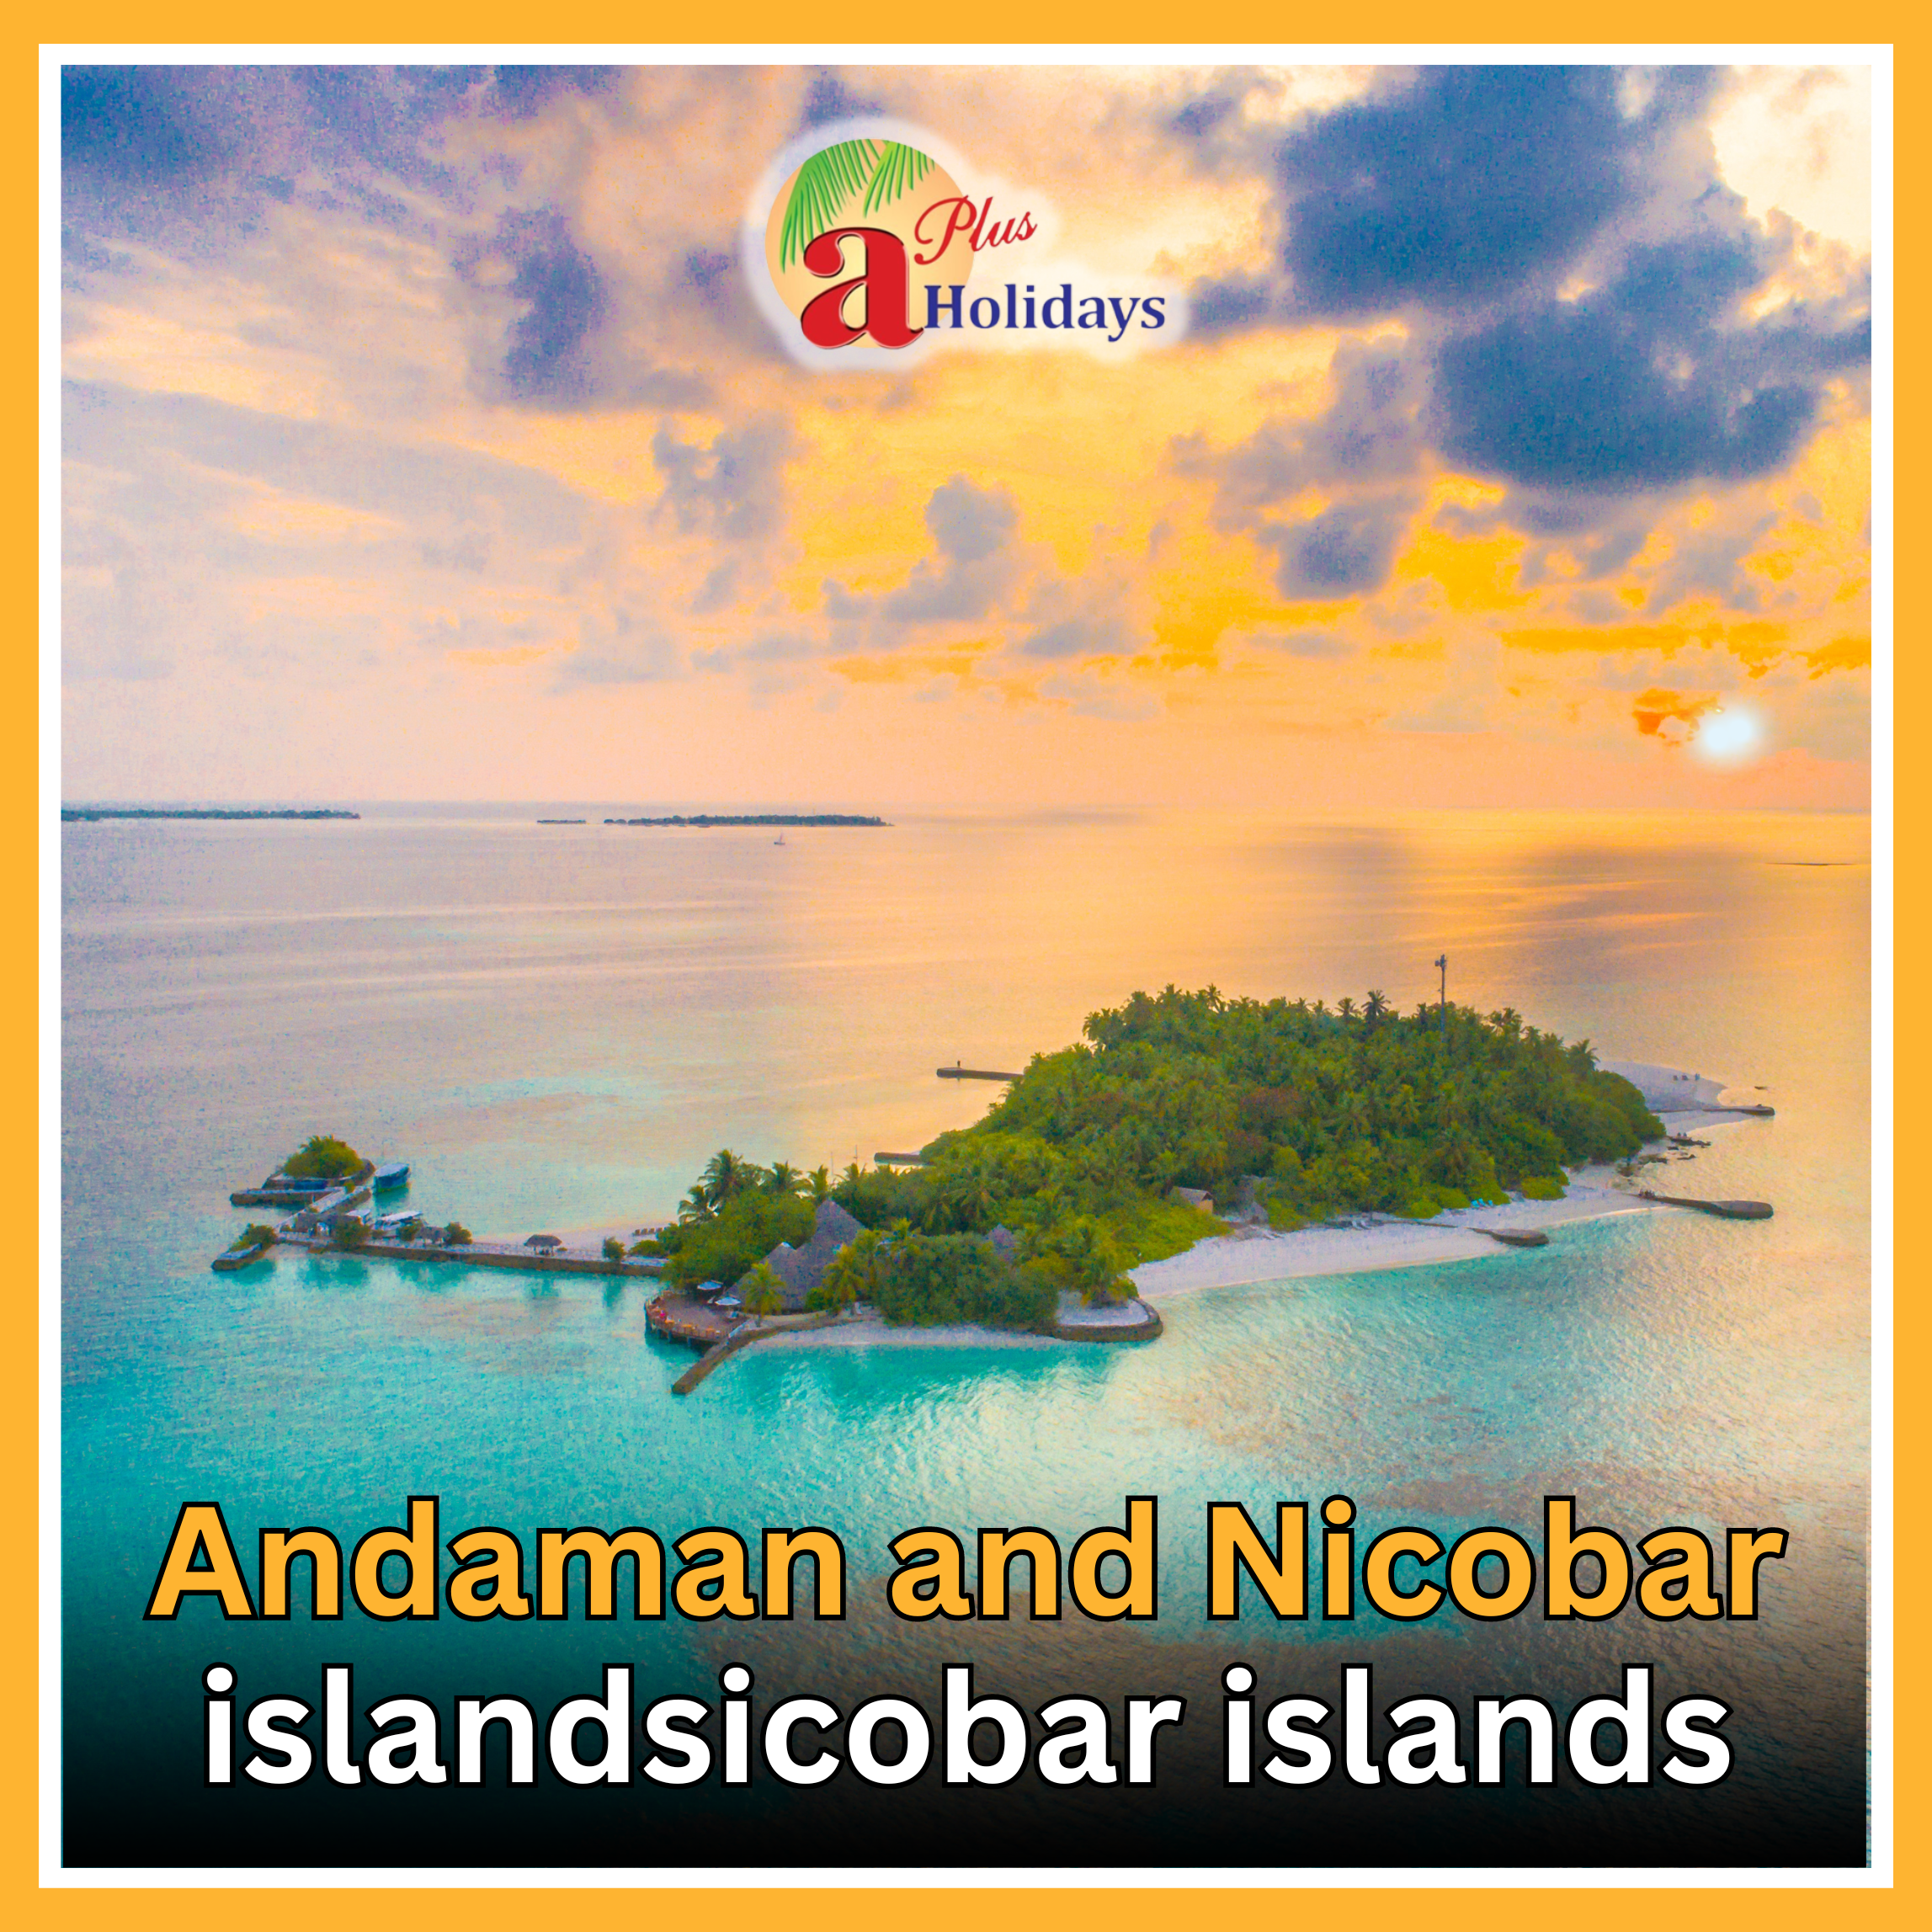 andaman and nicobar islands tour packages from delhi